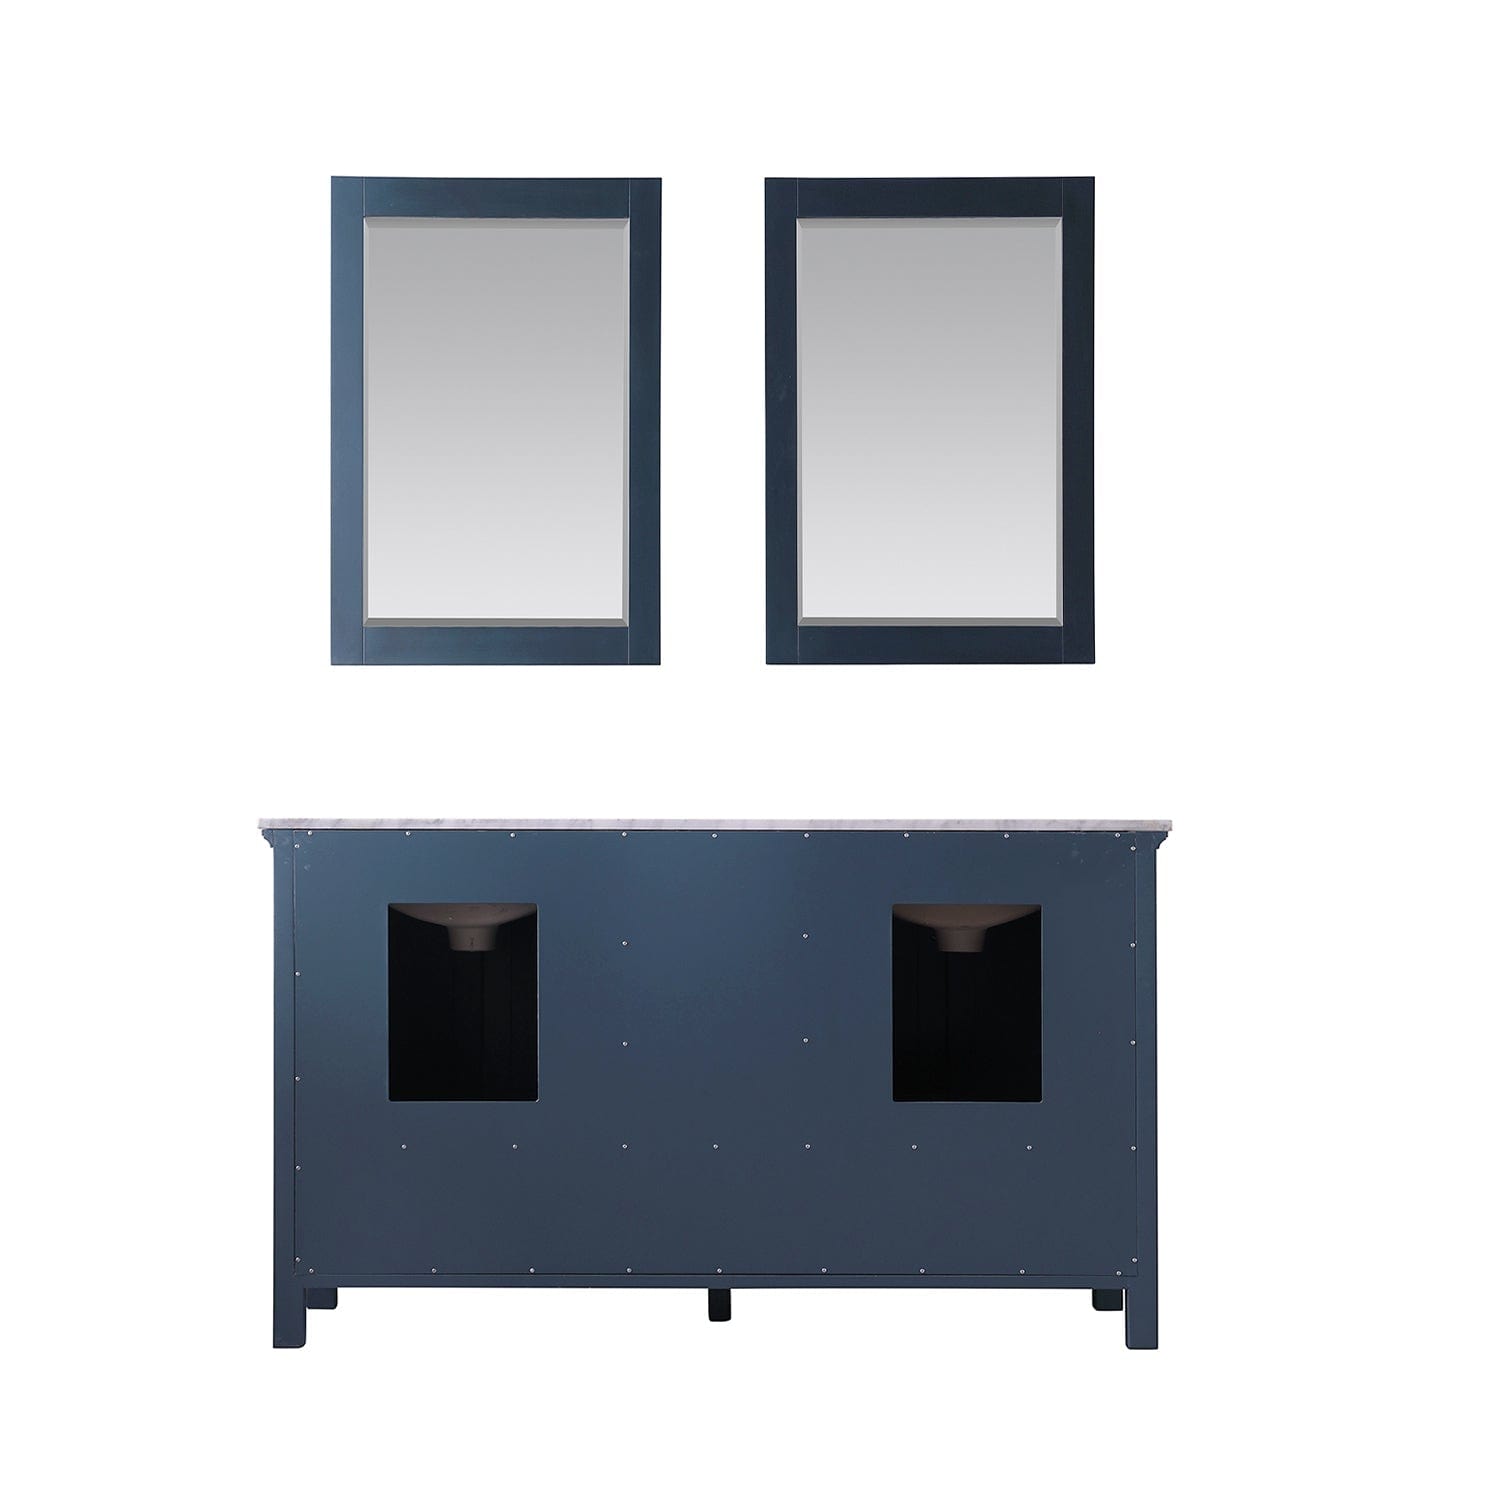 Altair Isla 60" Double Bathroom Vanity Set in Classic Blue and Carrara White Marble Countertop with Mirror 538060-CB-CA - Molaix631112970914Vanity538060-CB-CA